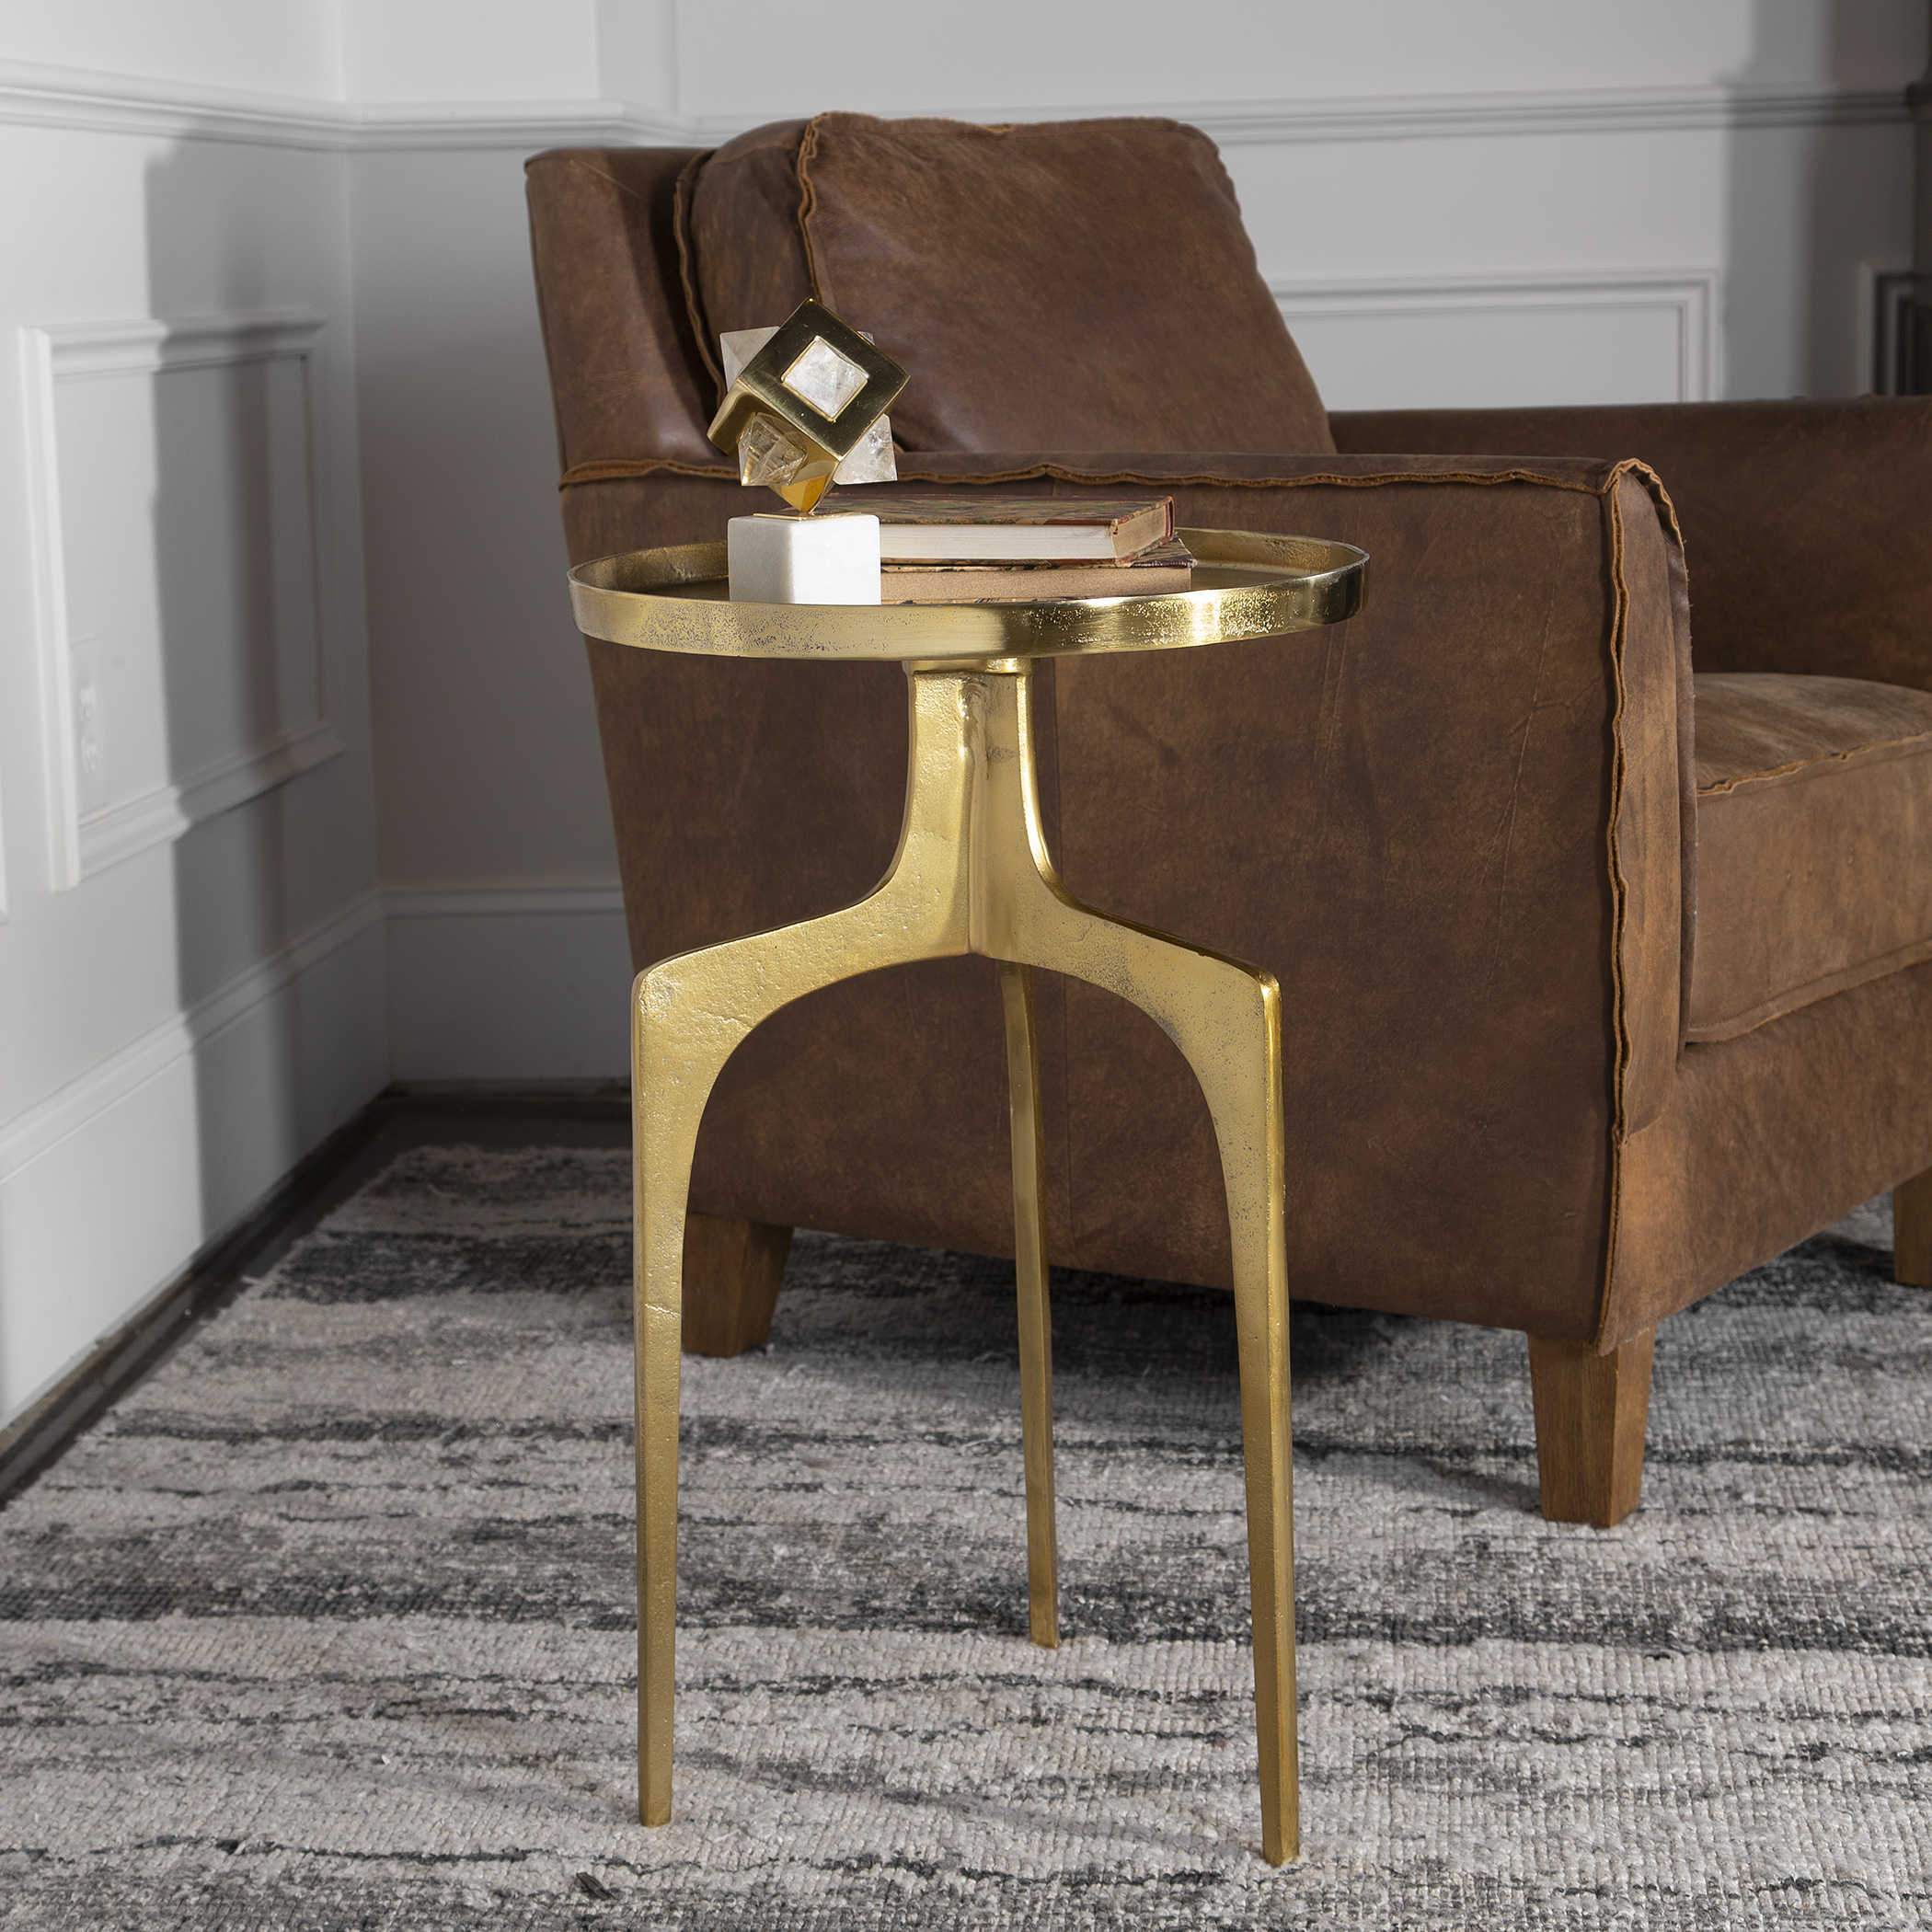 Uttermost Furniture Uttermost Kenna Accent Table